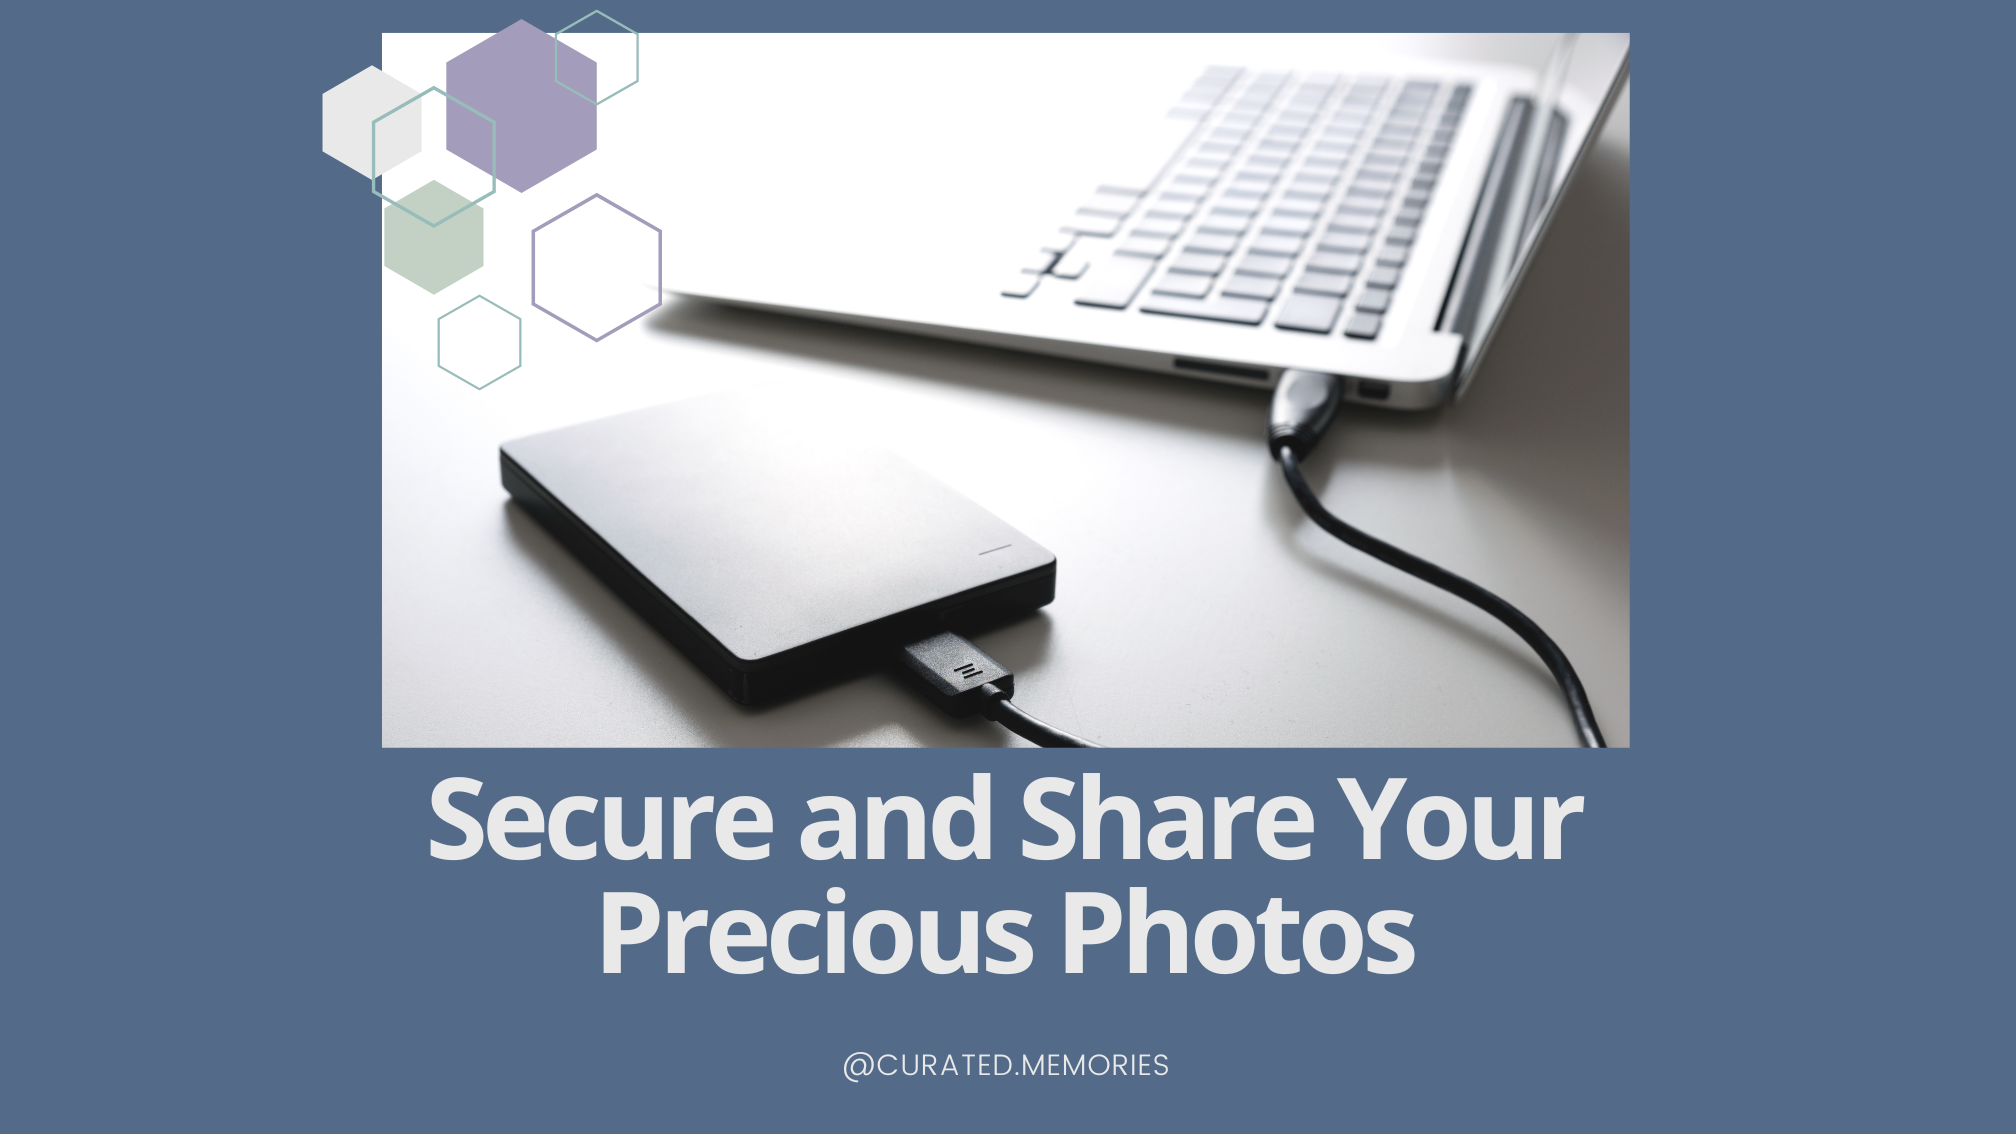 Secure and share your photos on an external Hard Drive